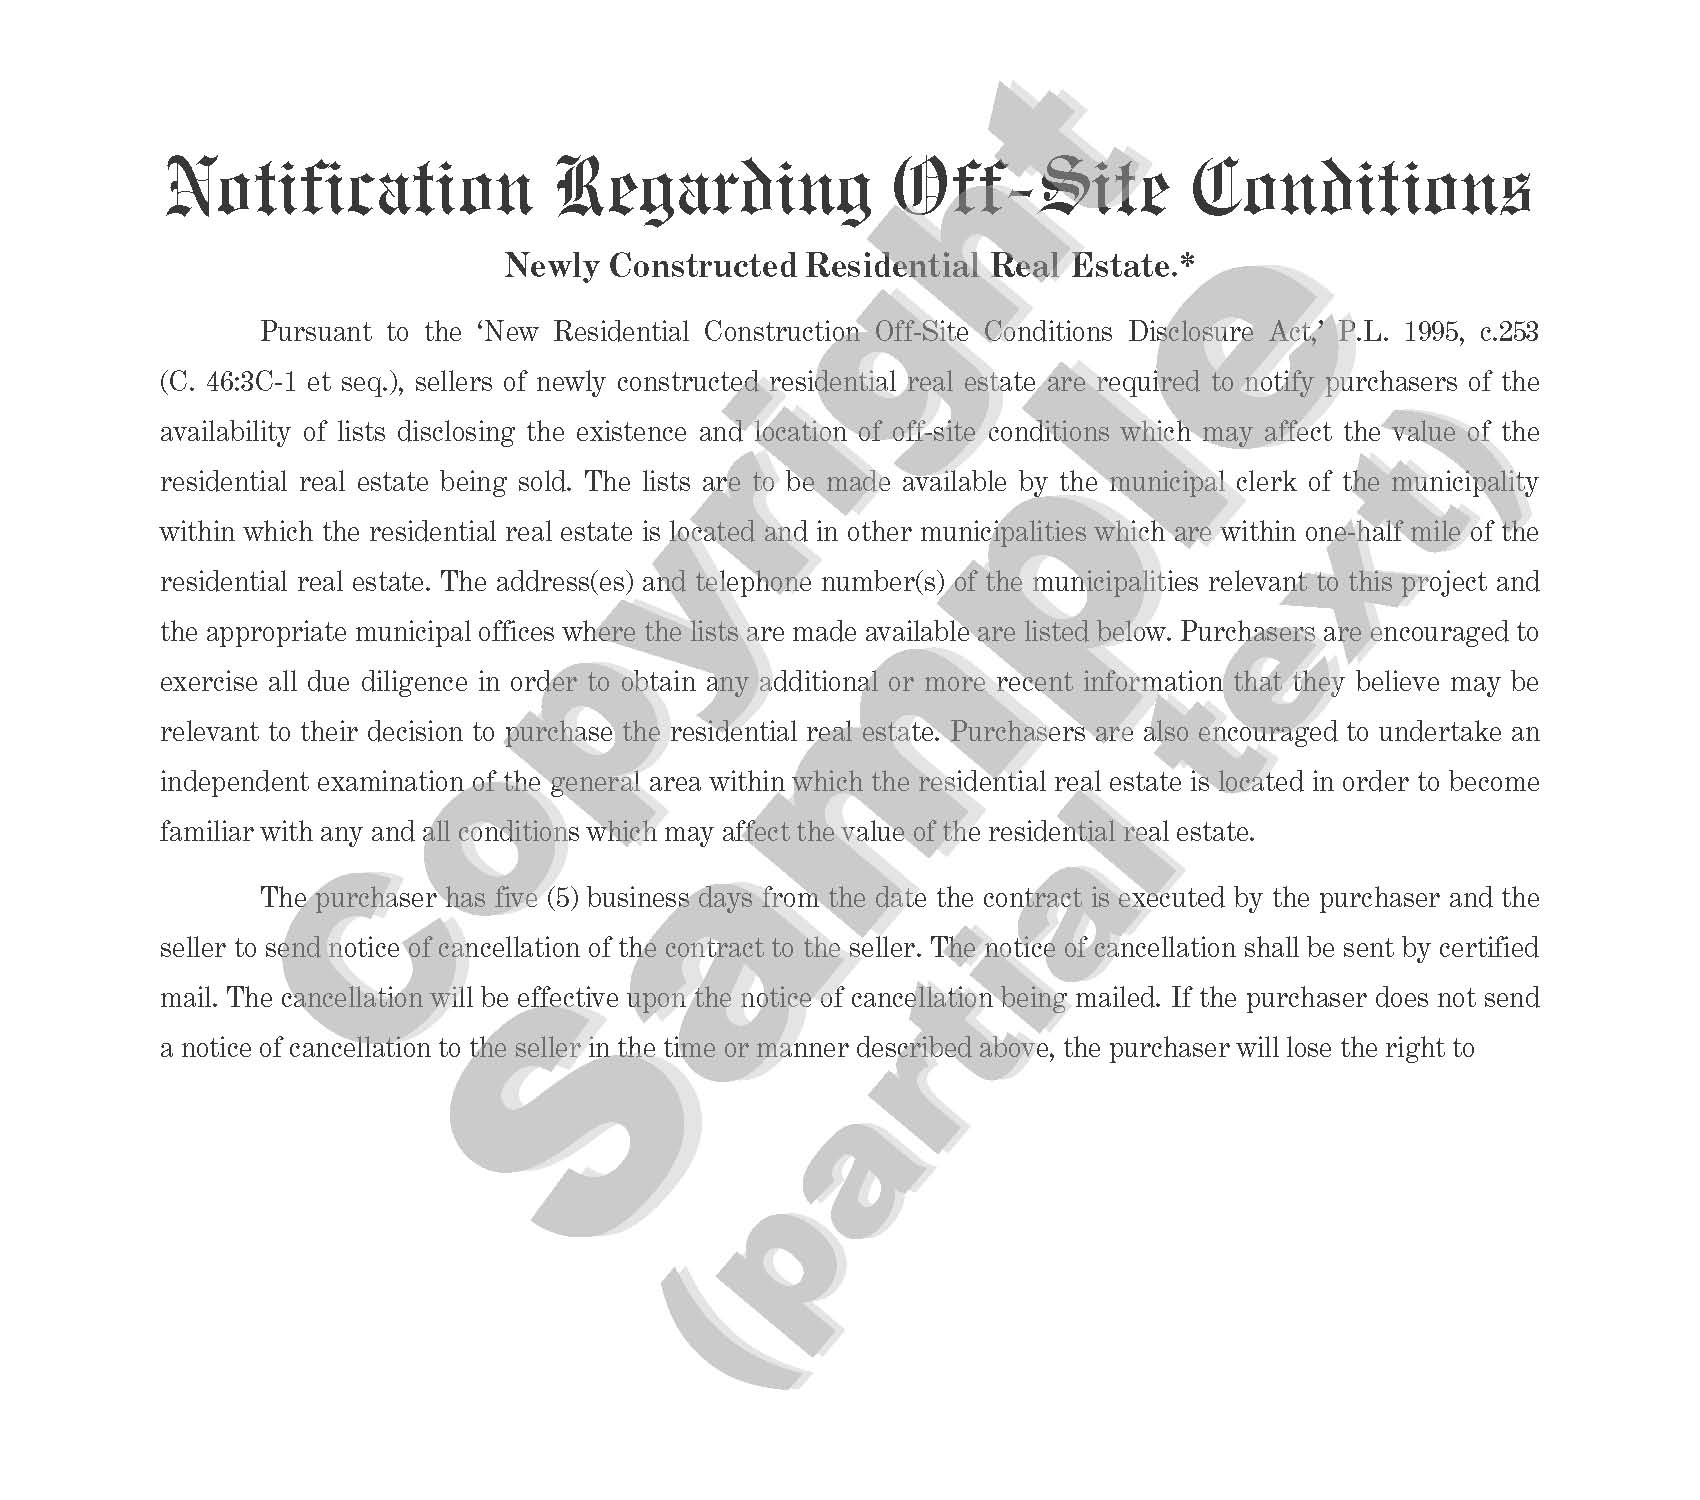 Notification Regarding Off-Site Conditions - Newly Constructed Residential Real Estate